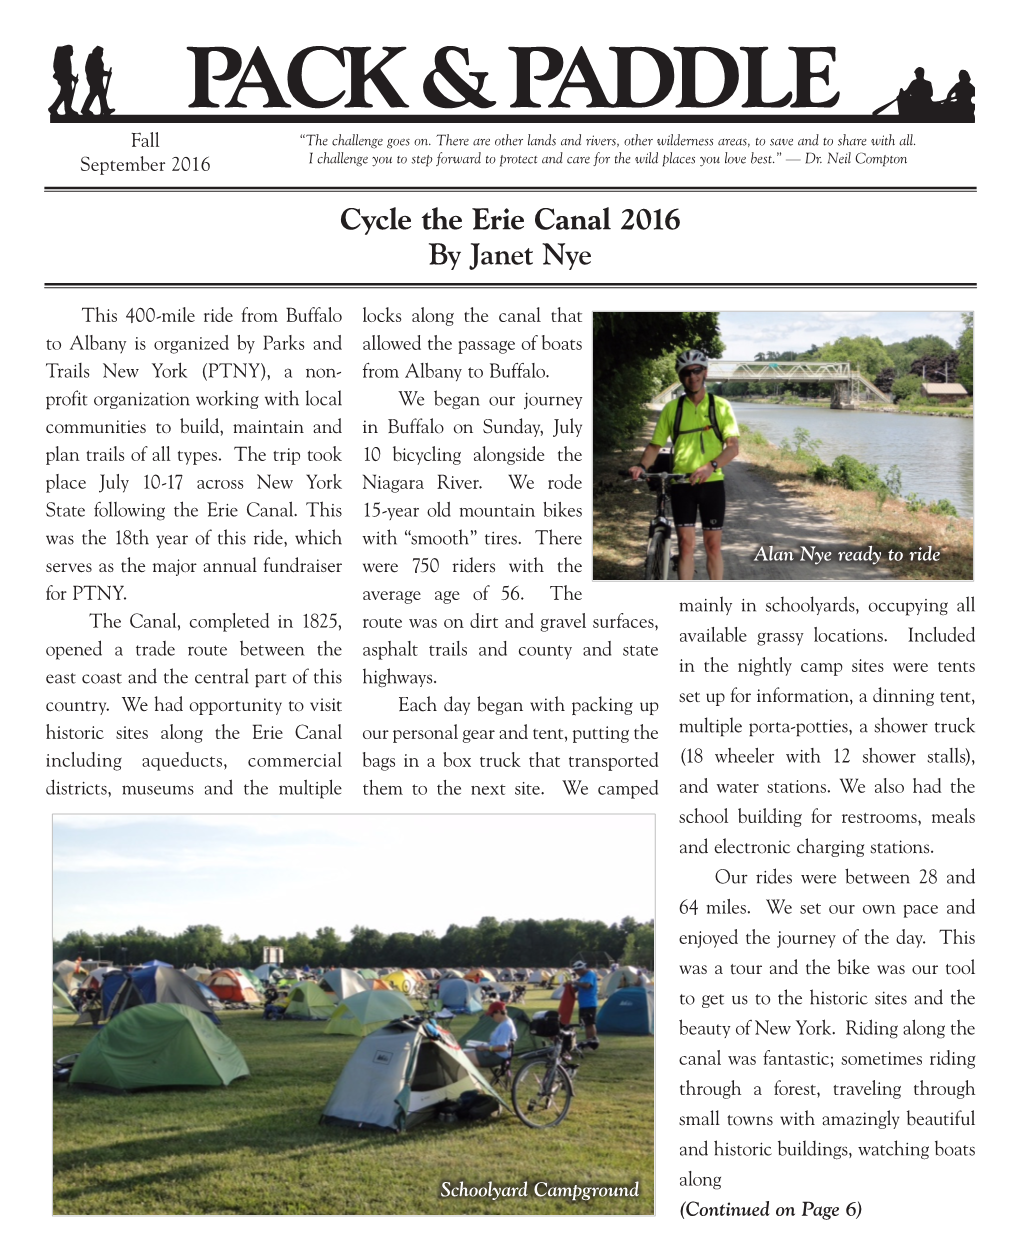 Cycle the Erie Canal 2016 by Janet